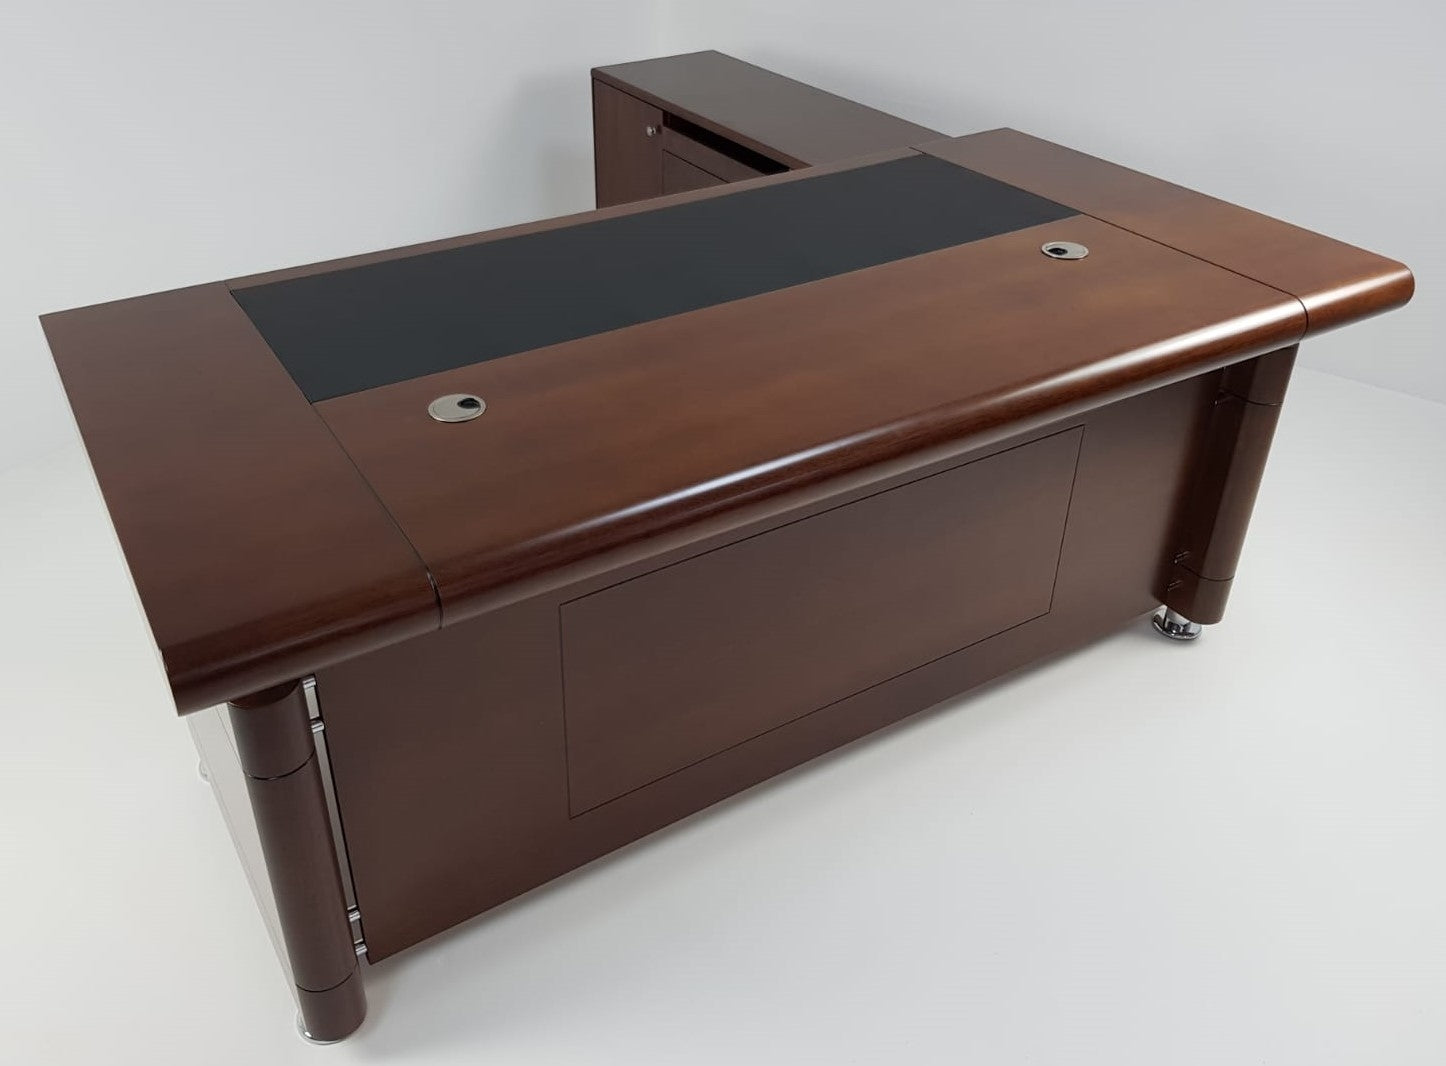 Light Walnut Real Wood Veneer Executive Desk With Roll Top - DES-1861